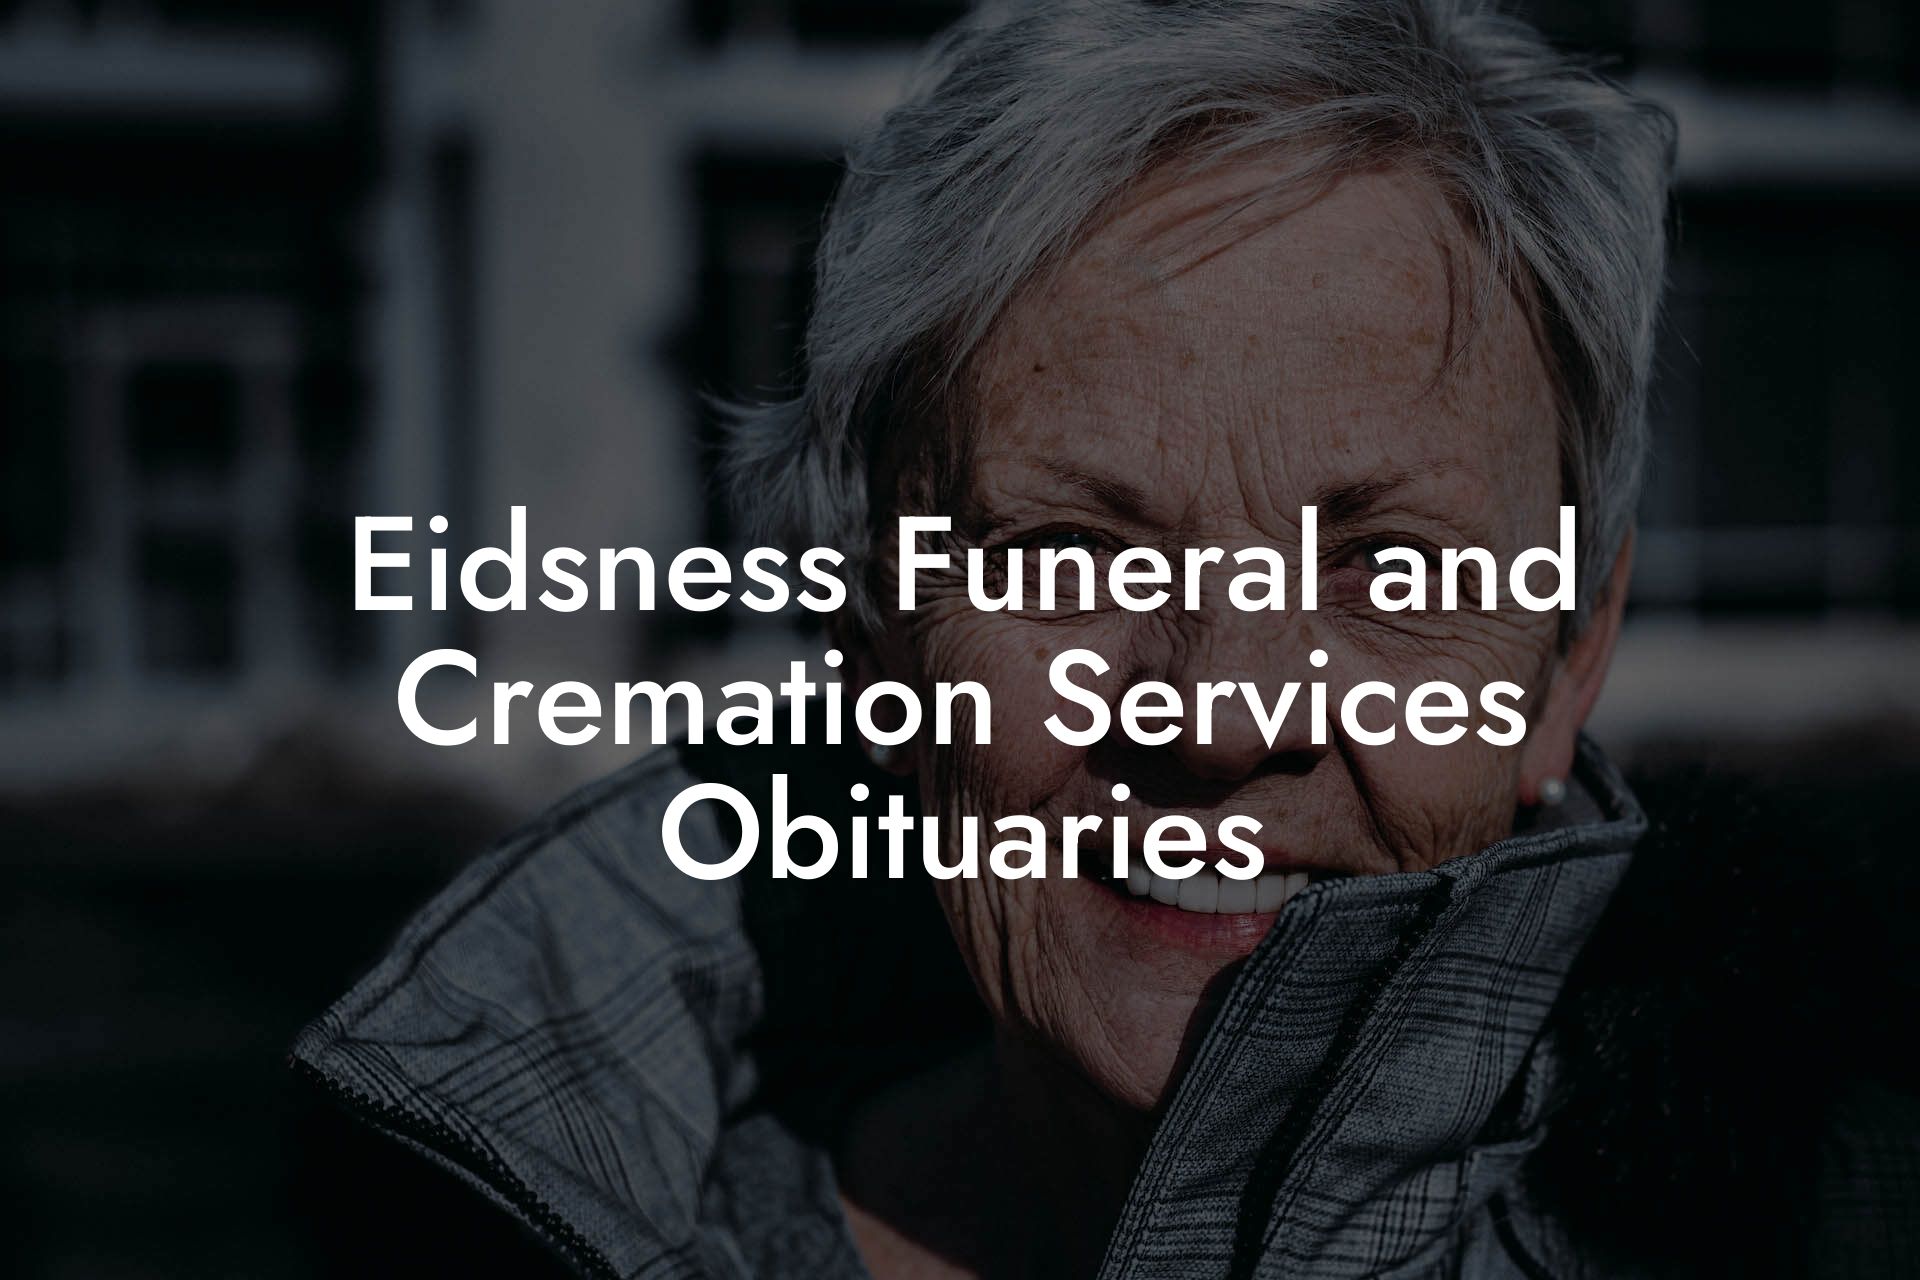 Eidsness Funeral and Cremation Services Obituaries